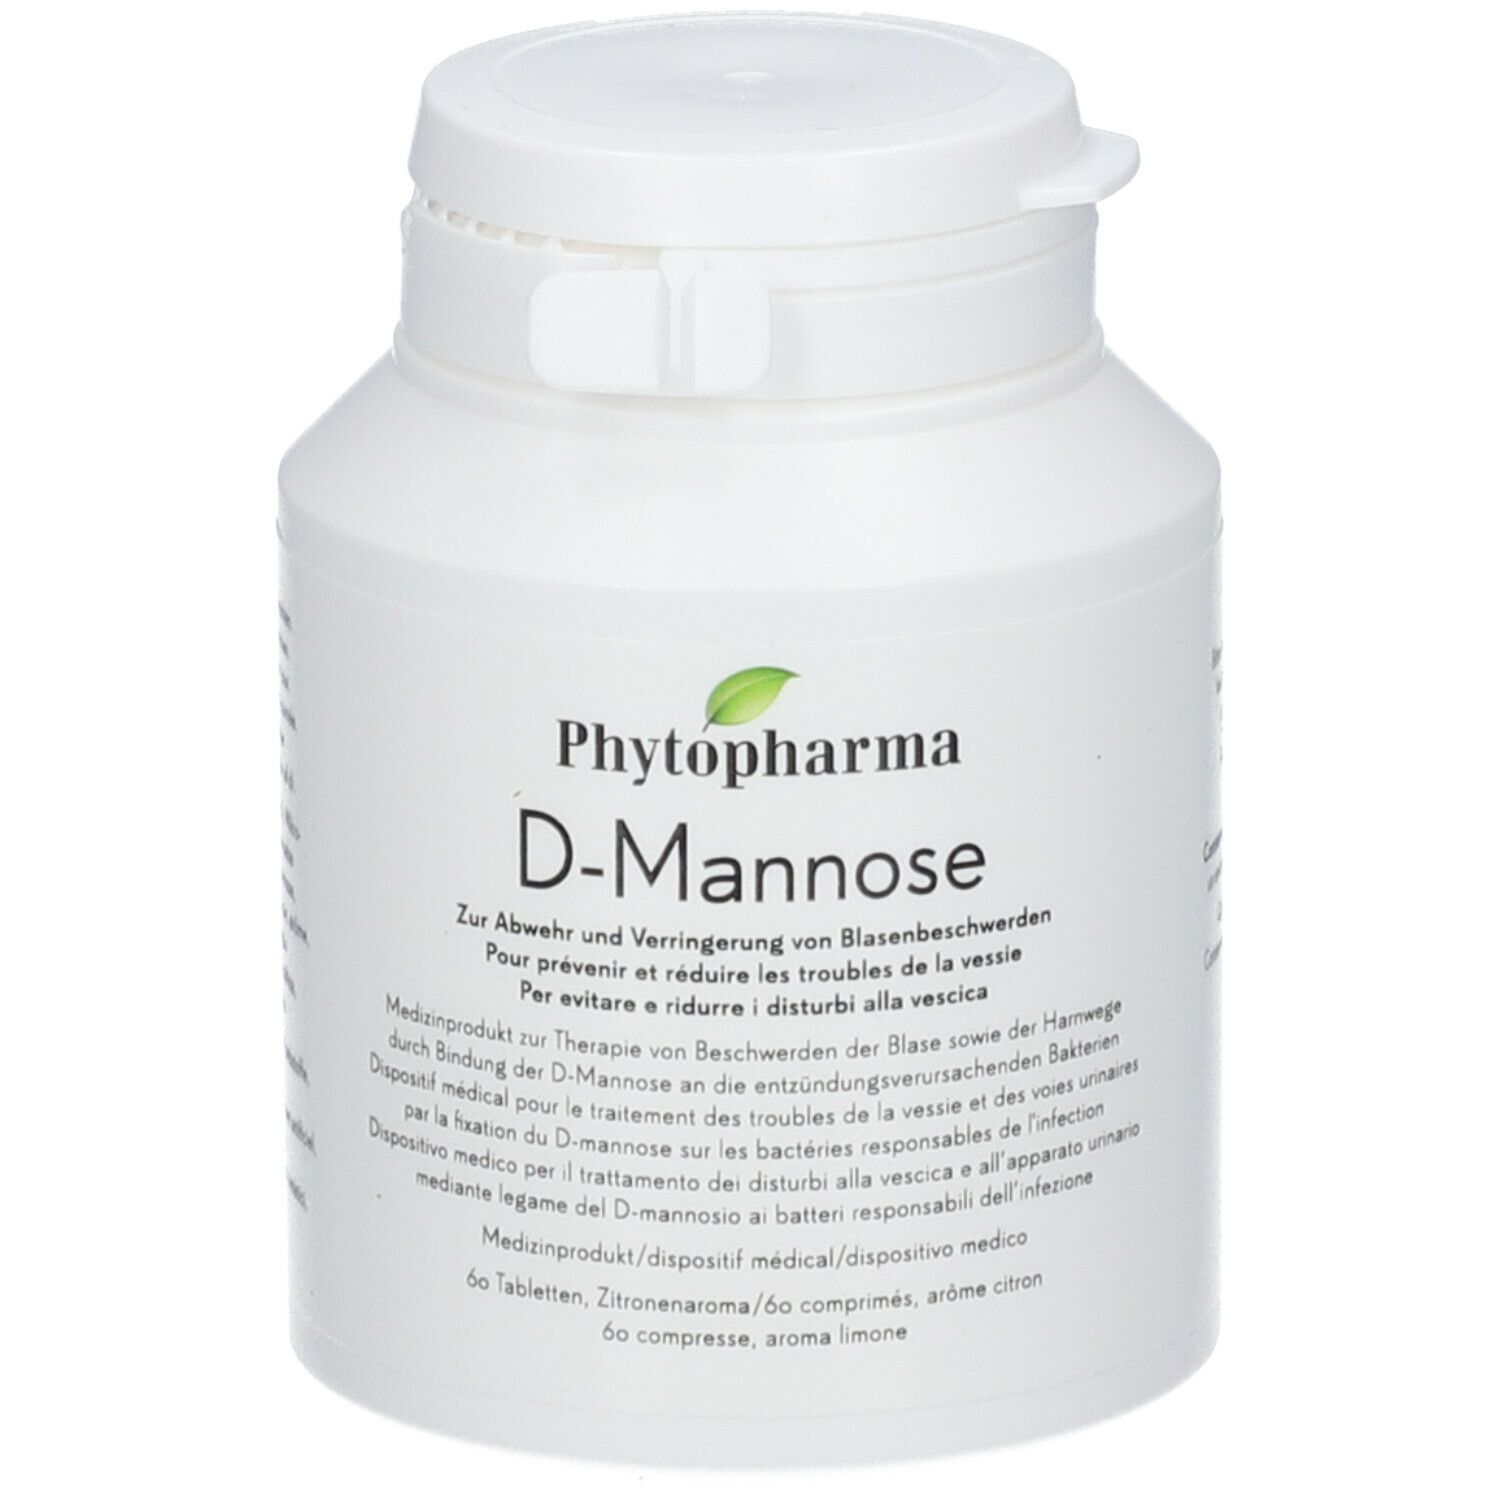 Image of Phytopharma D-Mannose